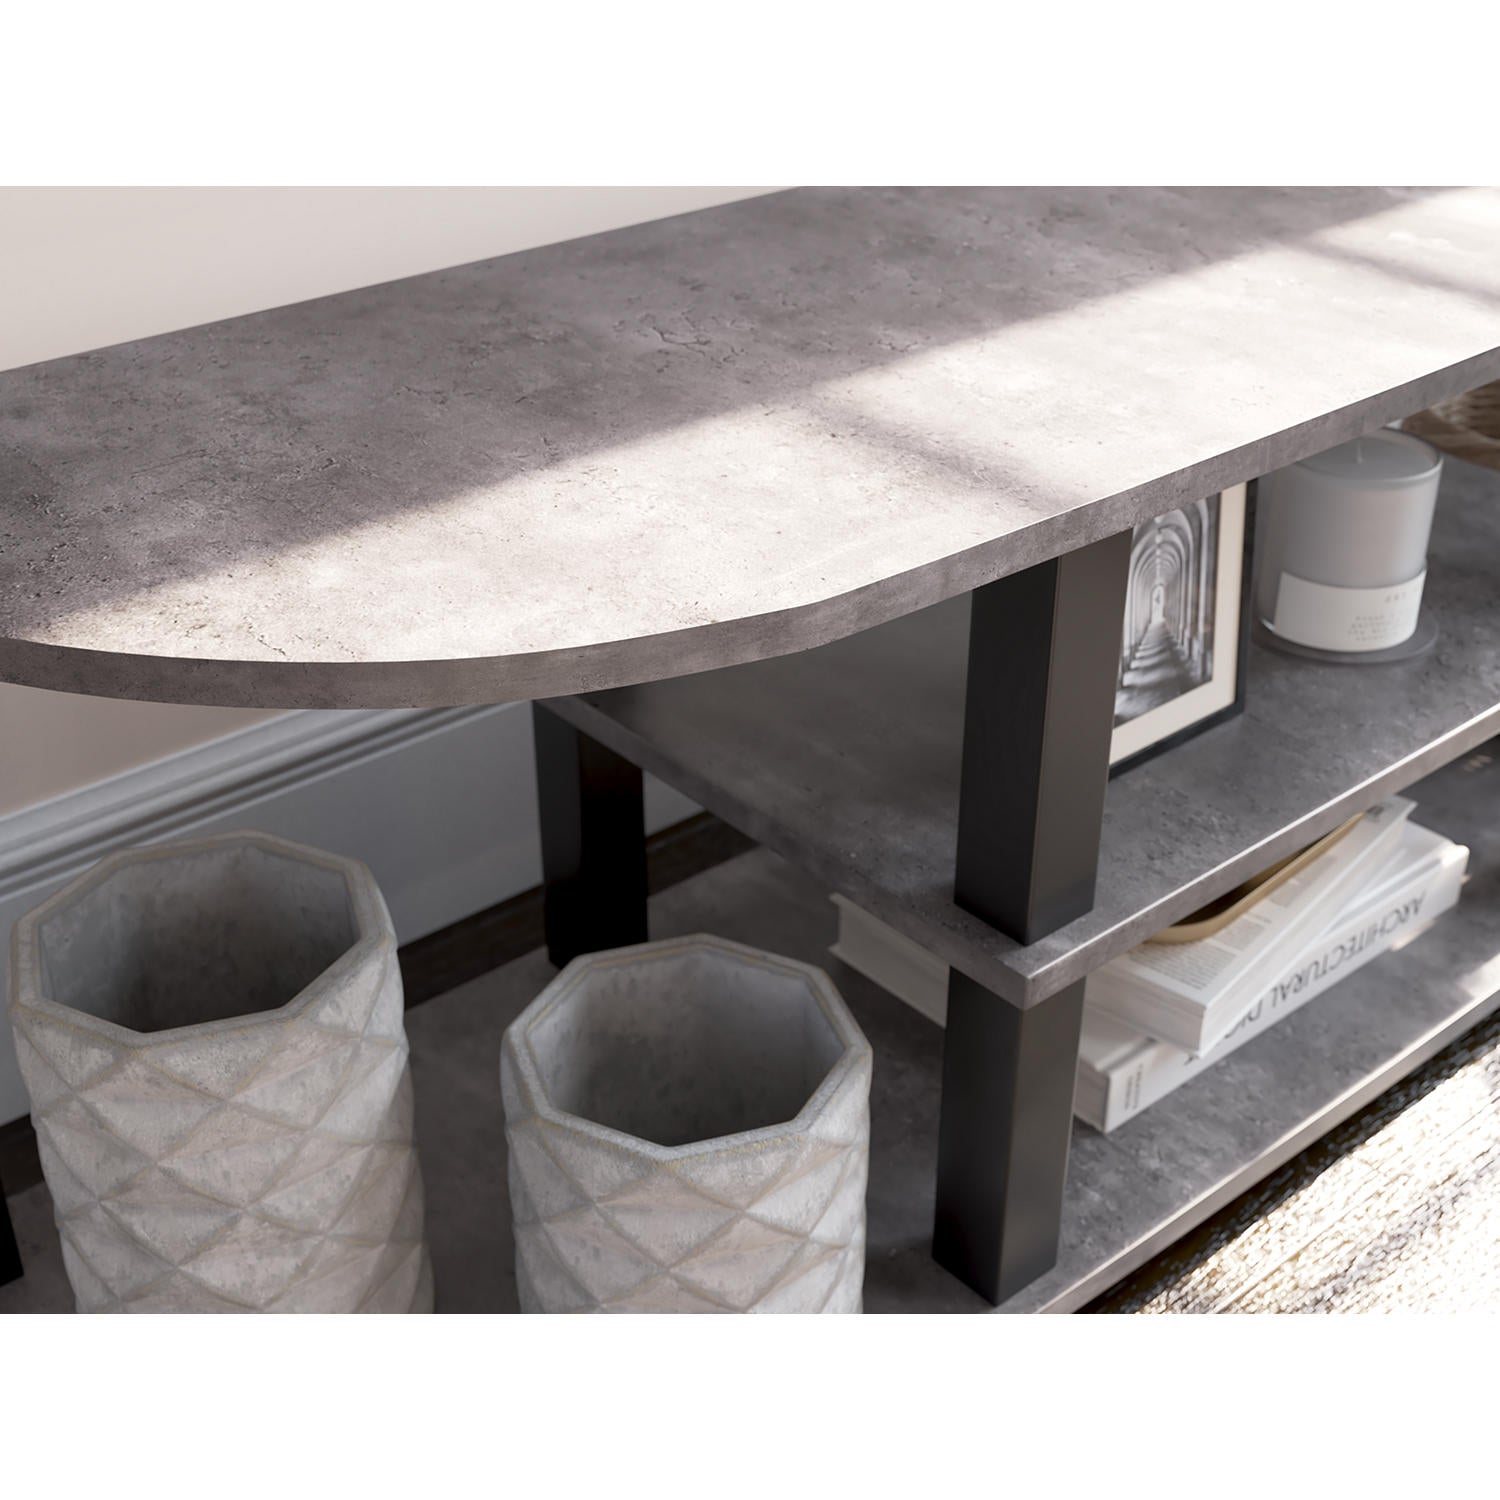 Jastyne TV Stand - Two-tone